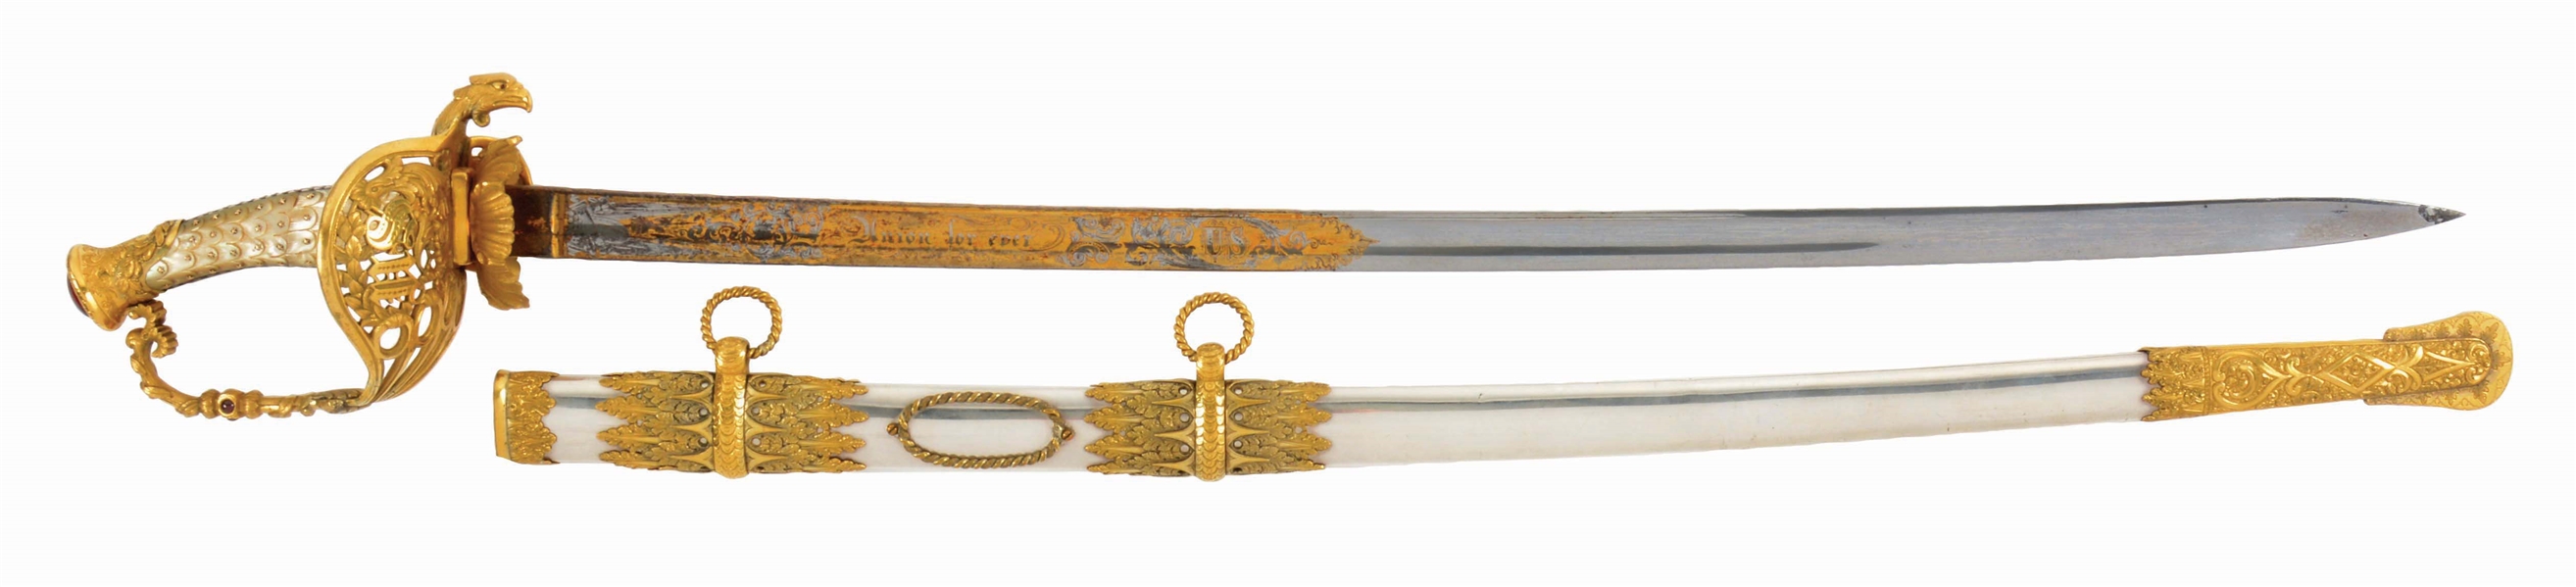 EXTRAORDINARY MOTHER OF PEARL GRIPPED OFFICERS PRESENTATION SWORD.